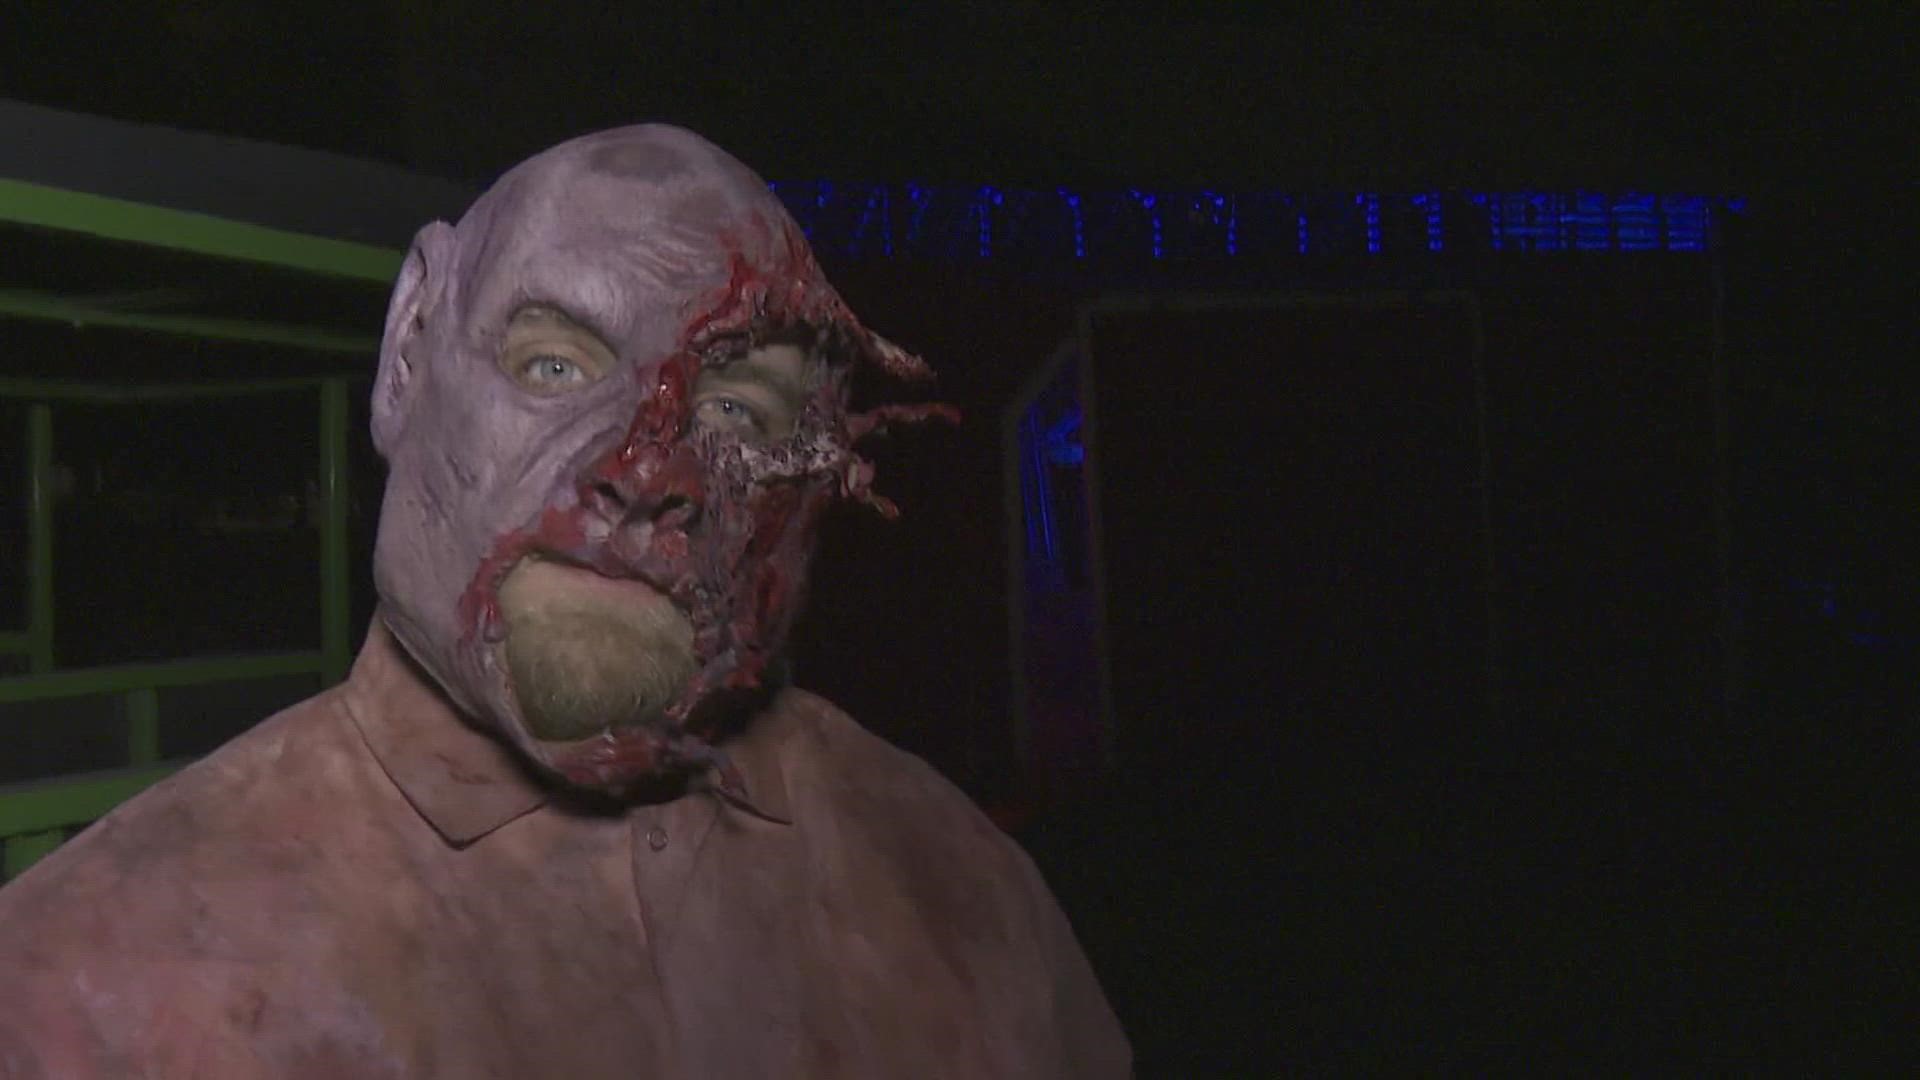 The popular attraction celebrated nearly four decades as one of the country’s top haunted attractions.